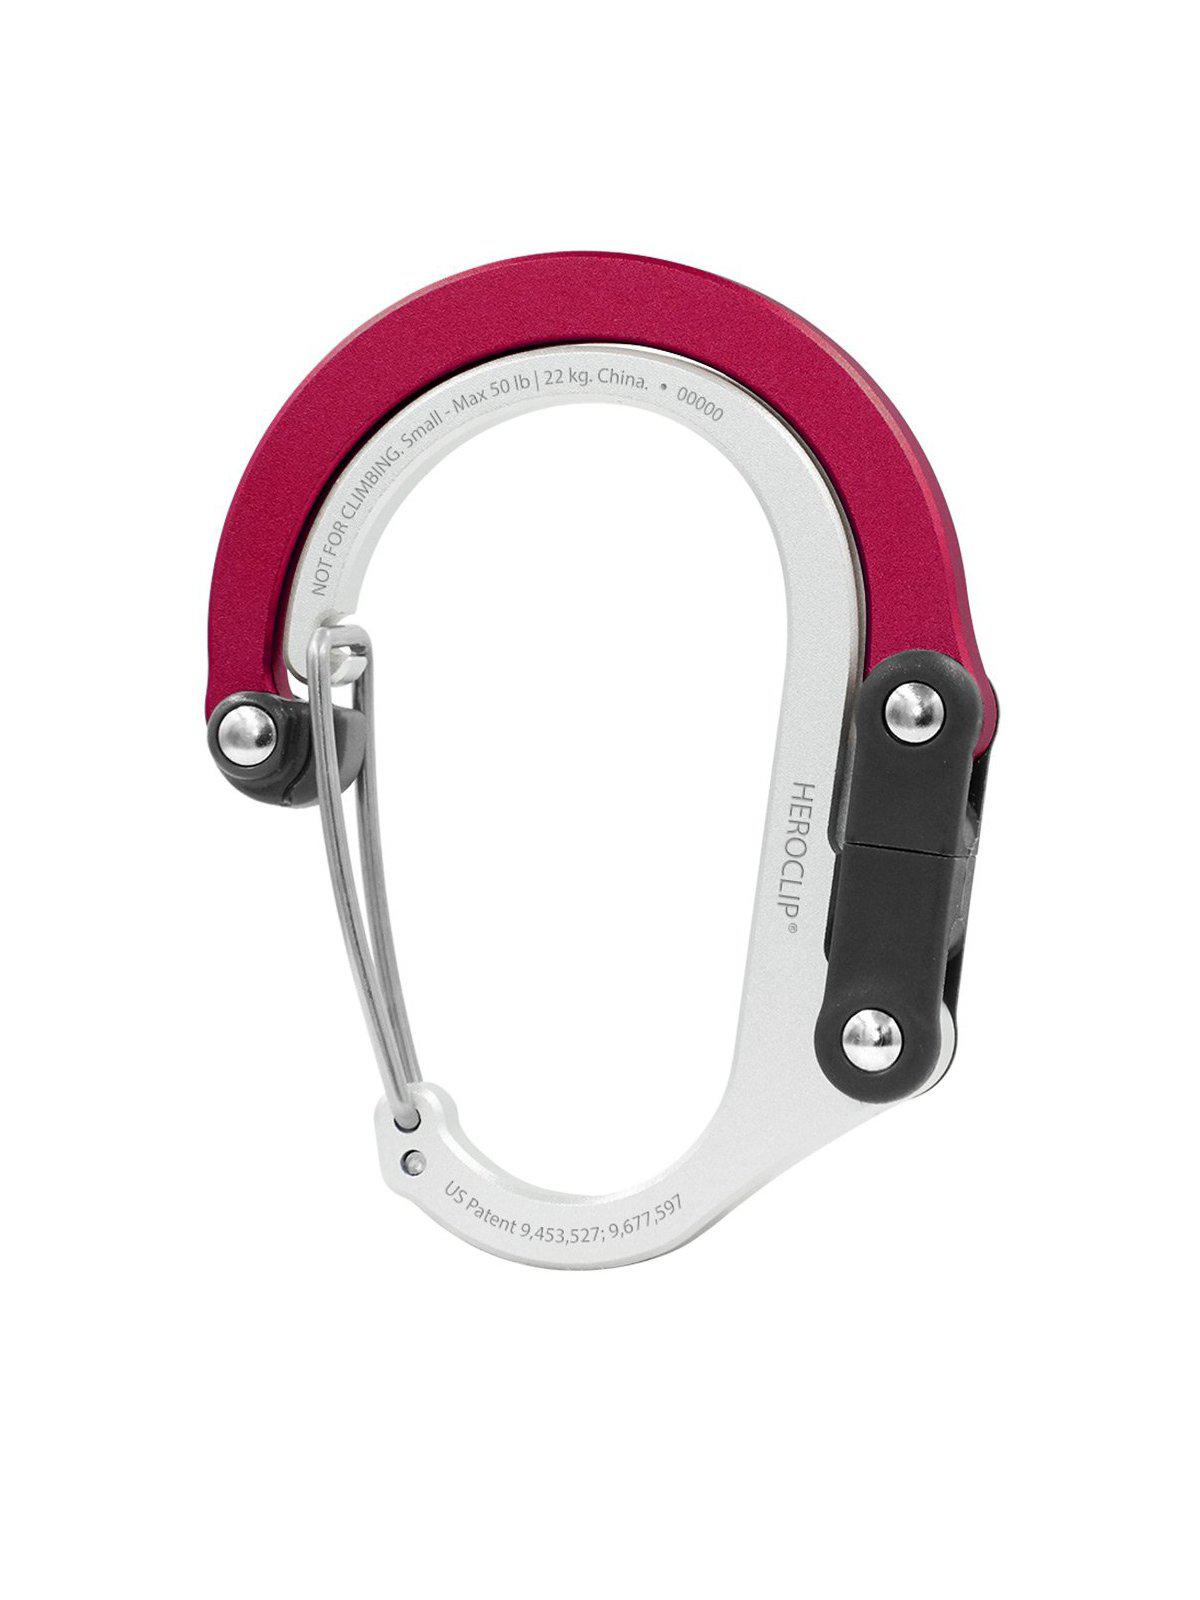 Heroclip Carabiner Small Hot Rod Red